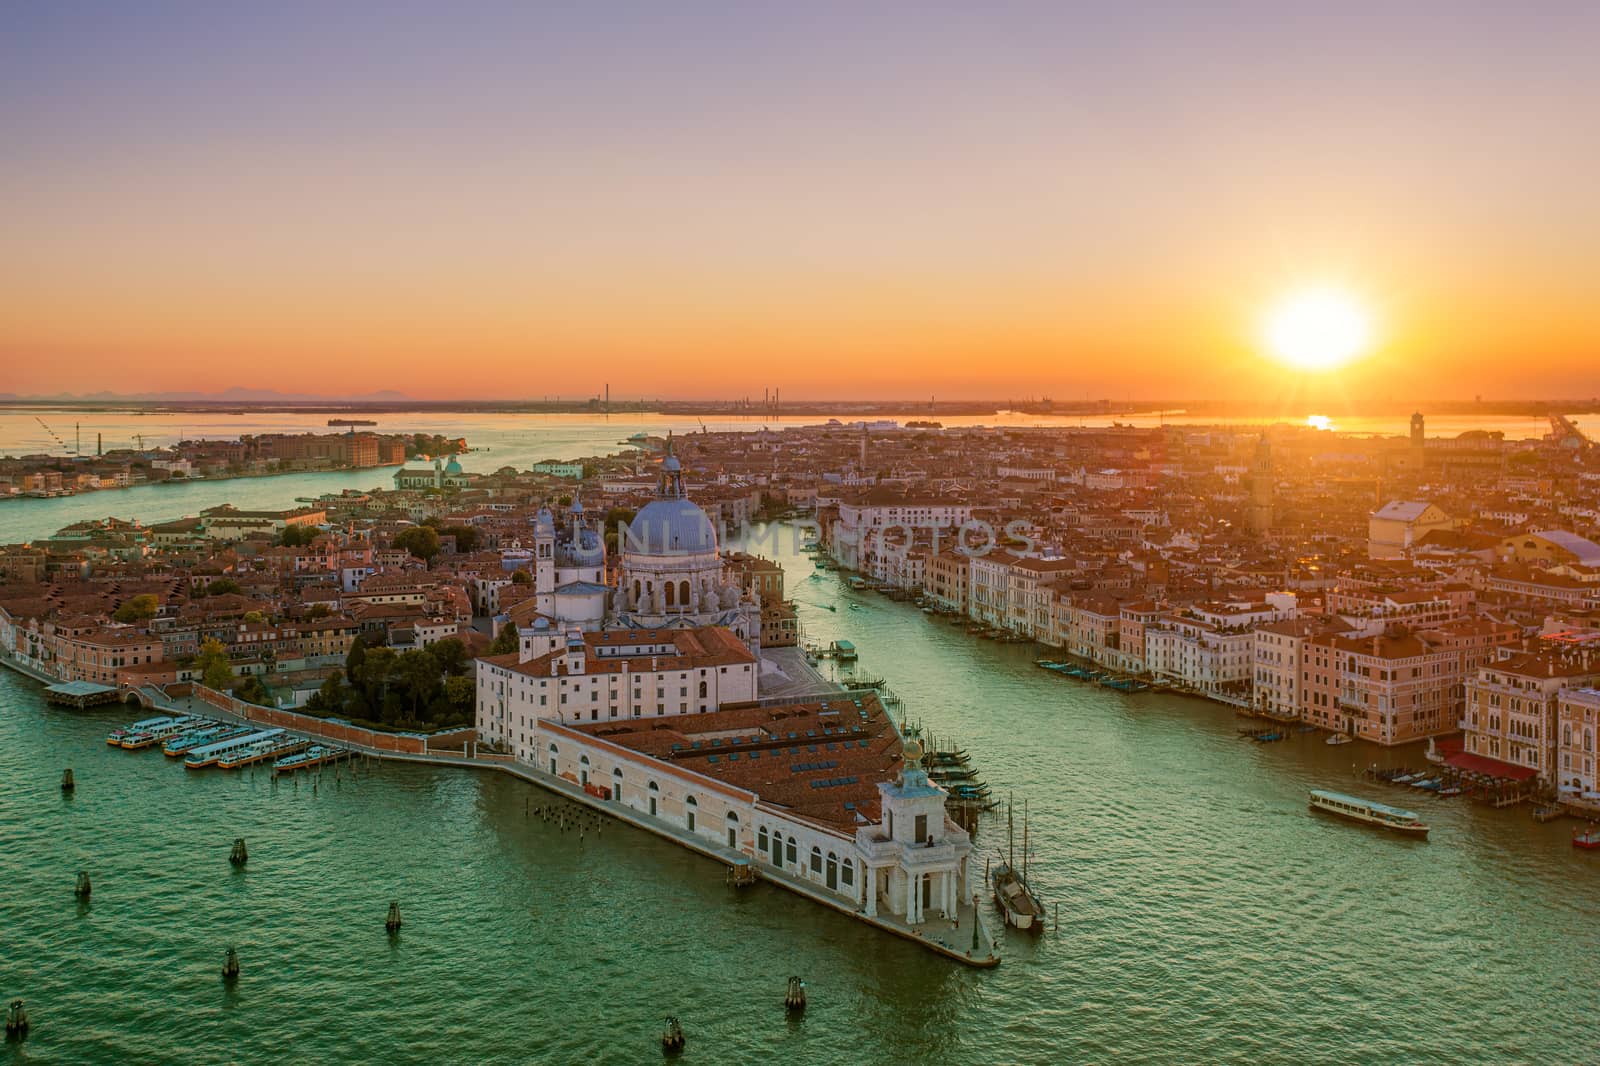 Grand Canal of Venice at Sunset by COffe